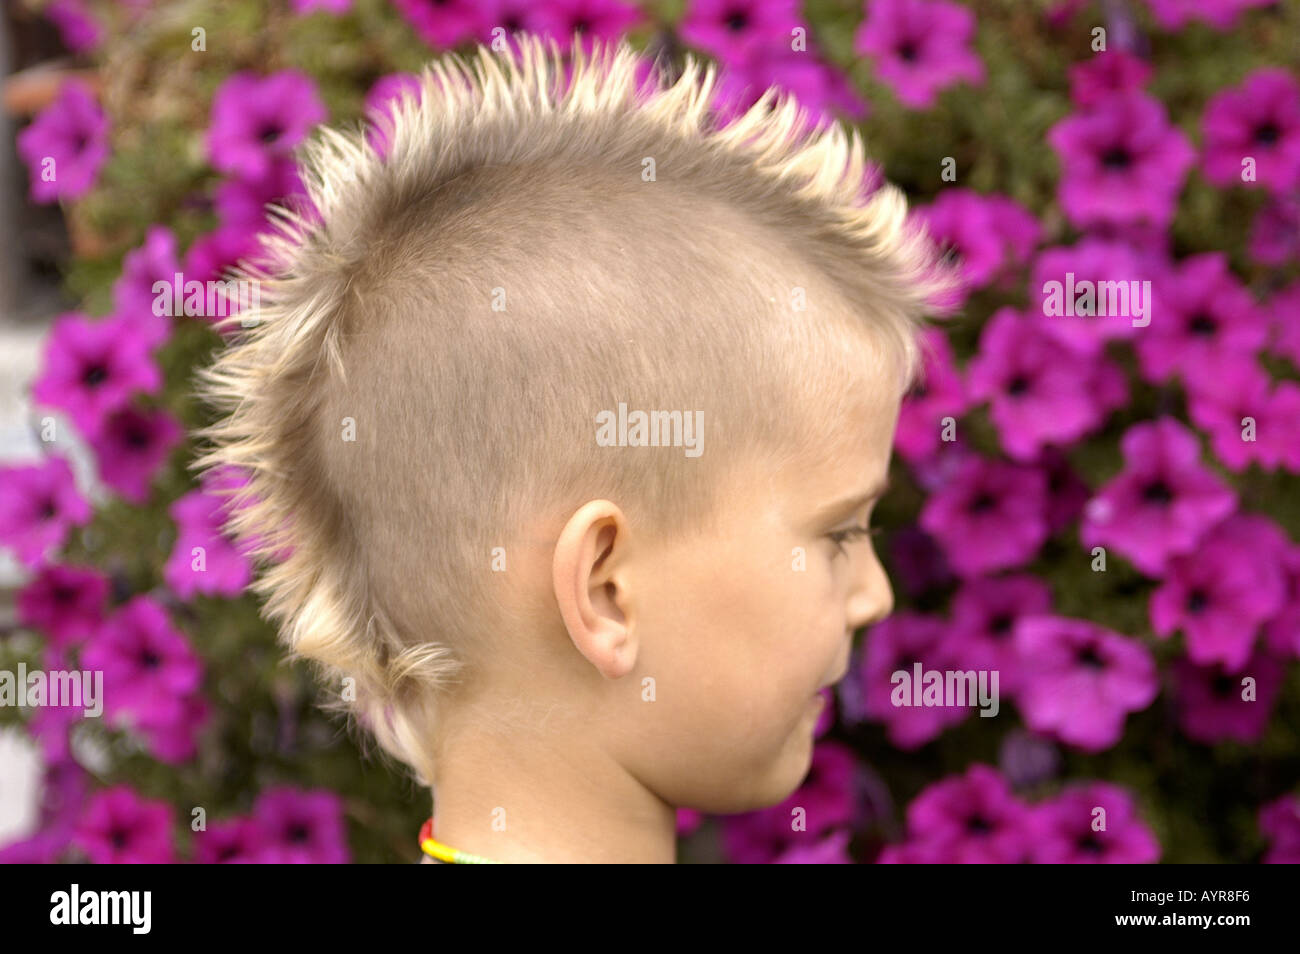 7 years old boy punk rocker with mohawk and violet flowers in background Stock Photo